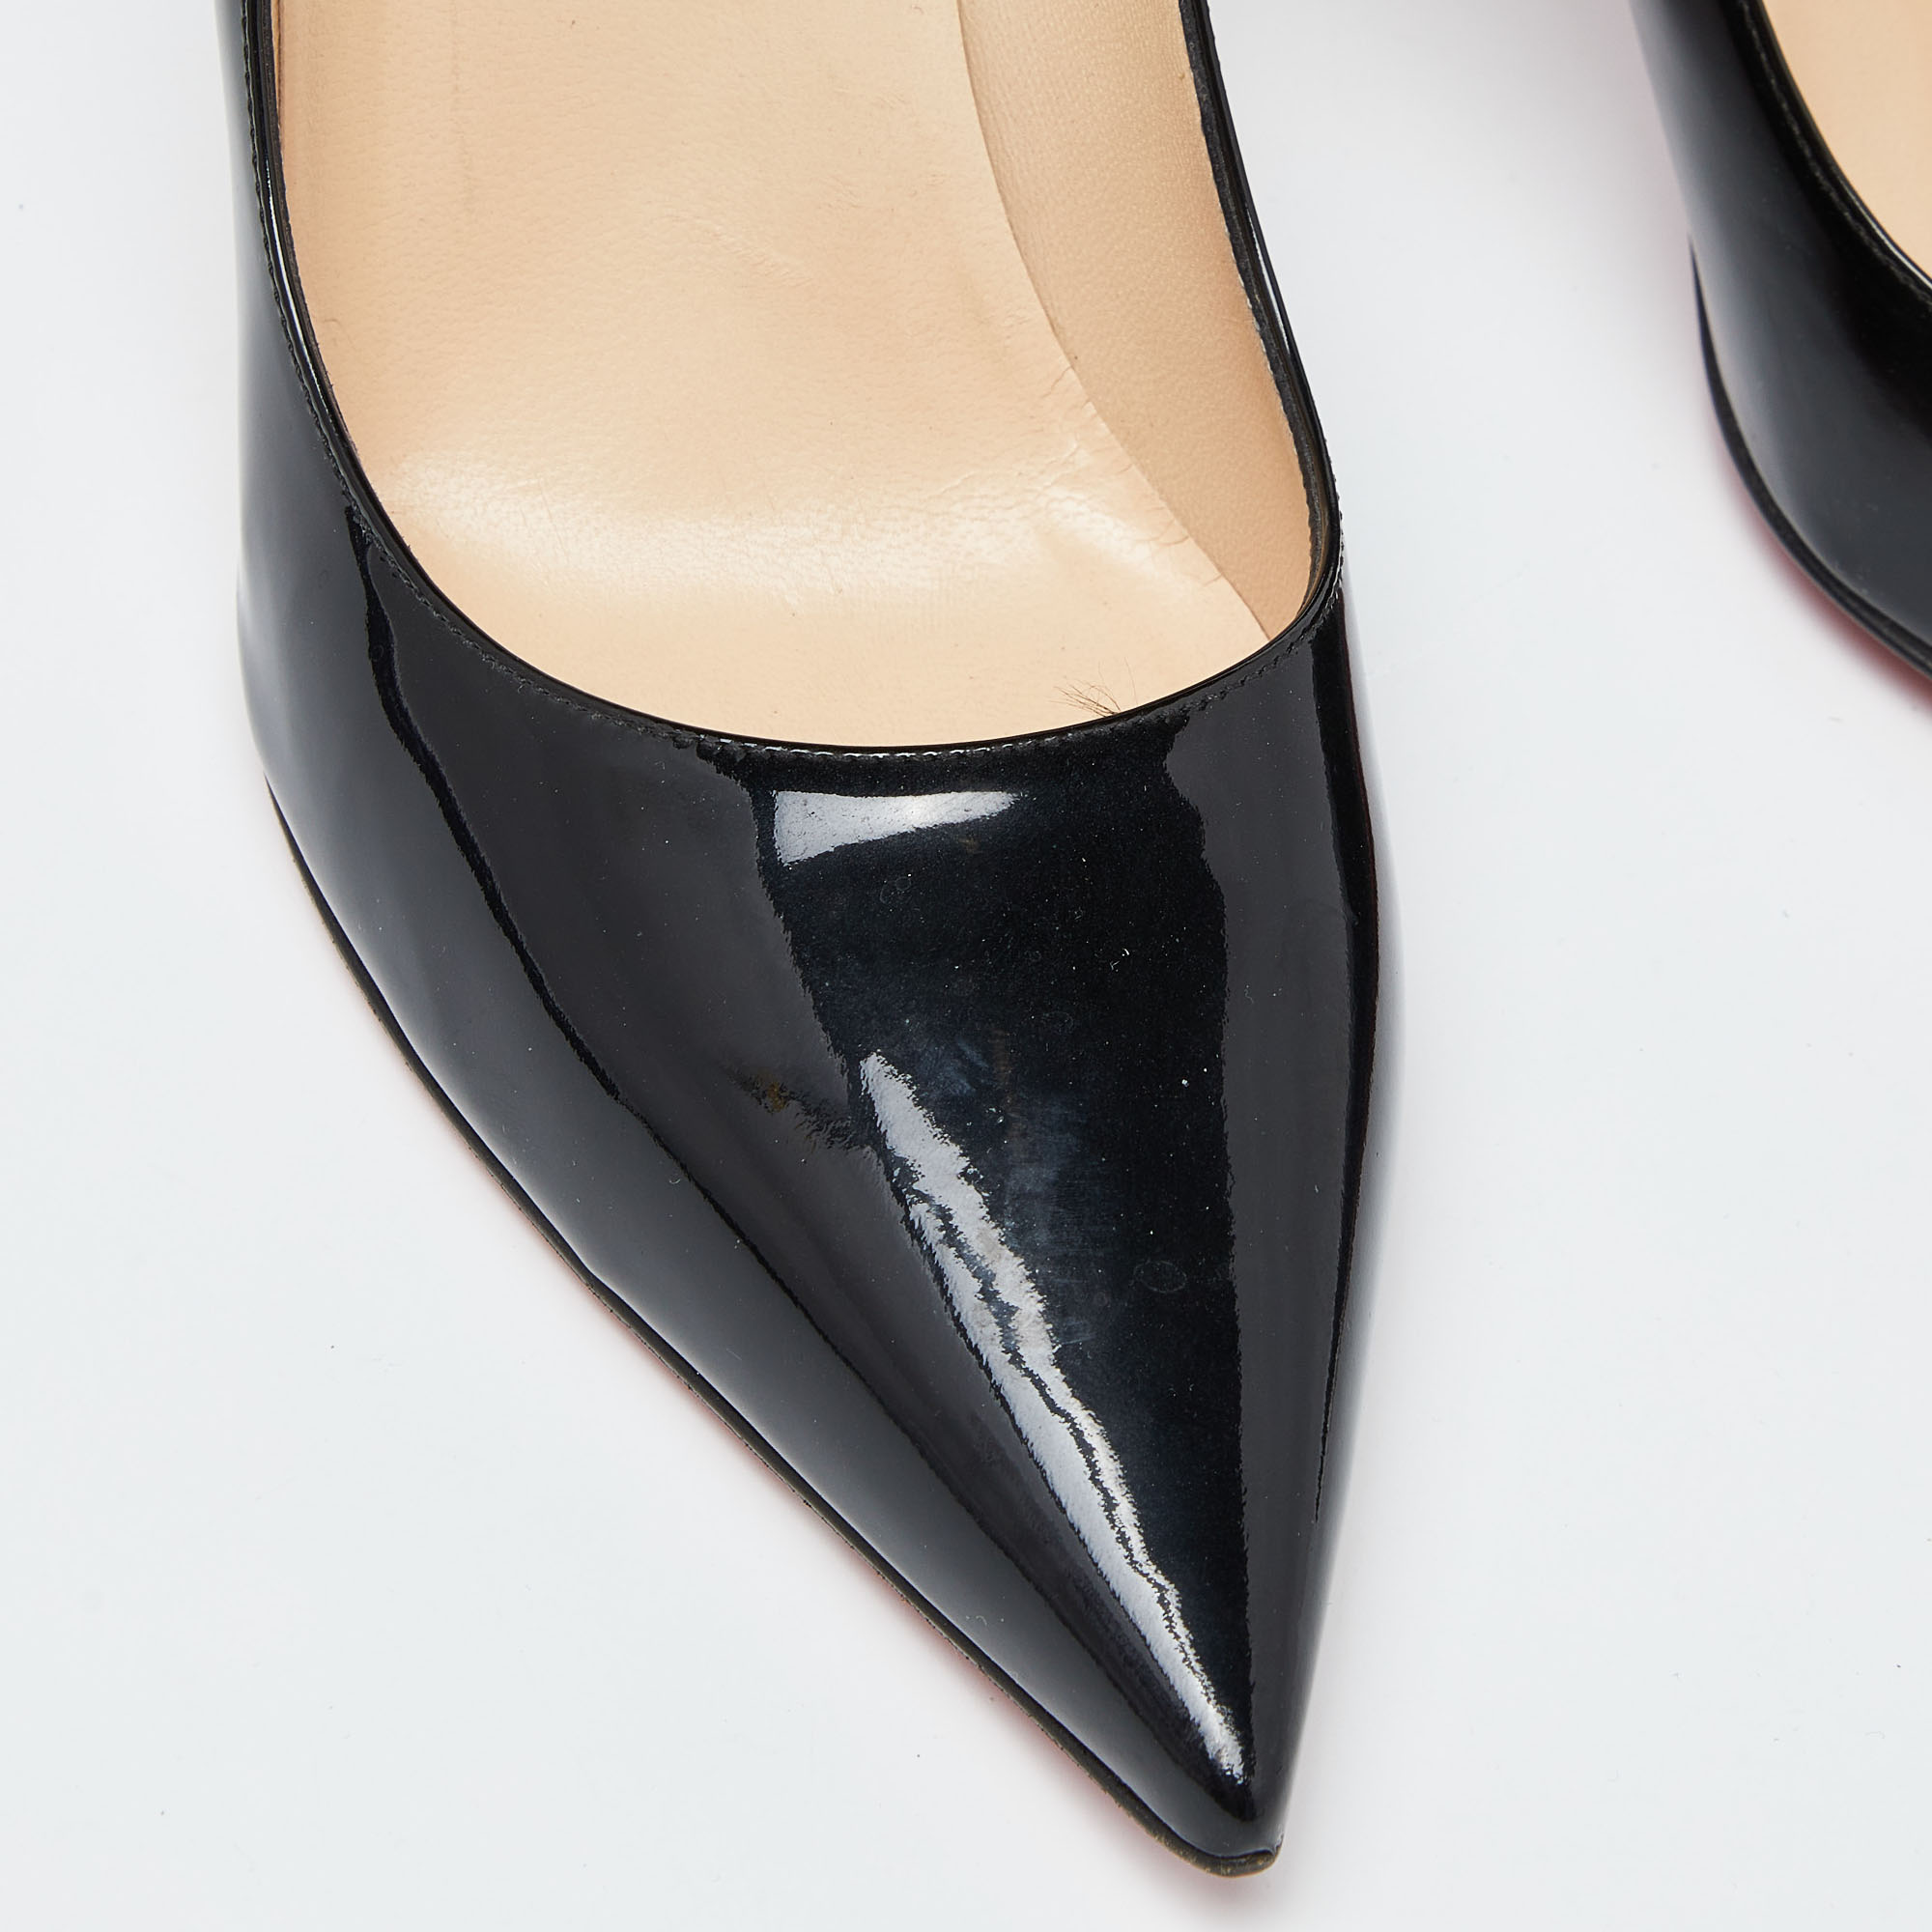 Christian Louboutin Black Patent Leather Pointed Toe Pumps Size 40.5